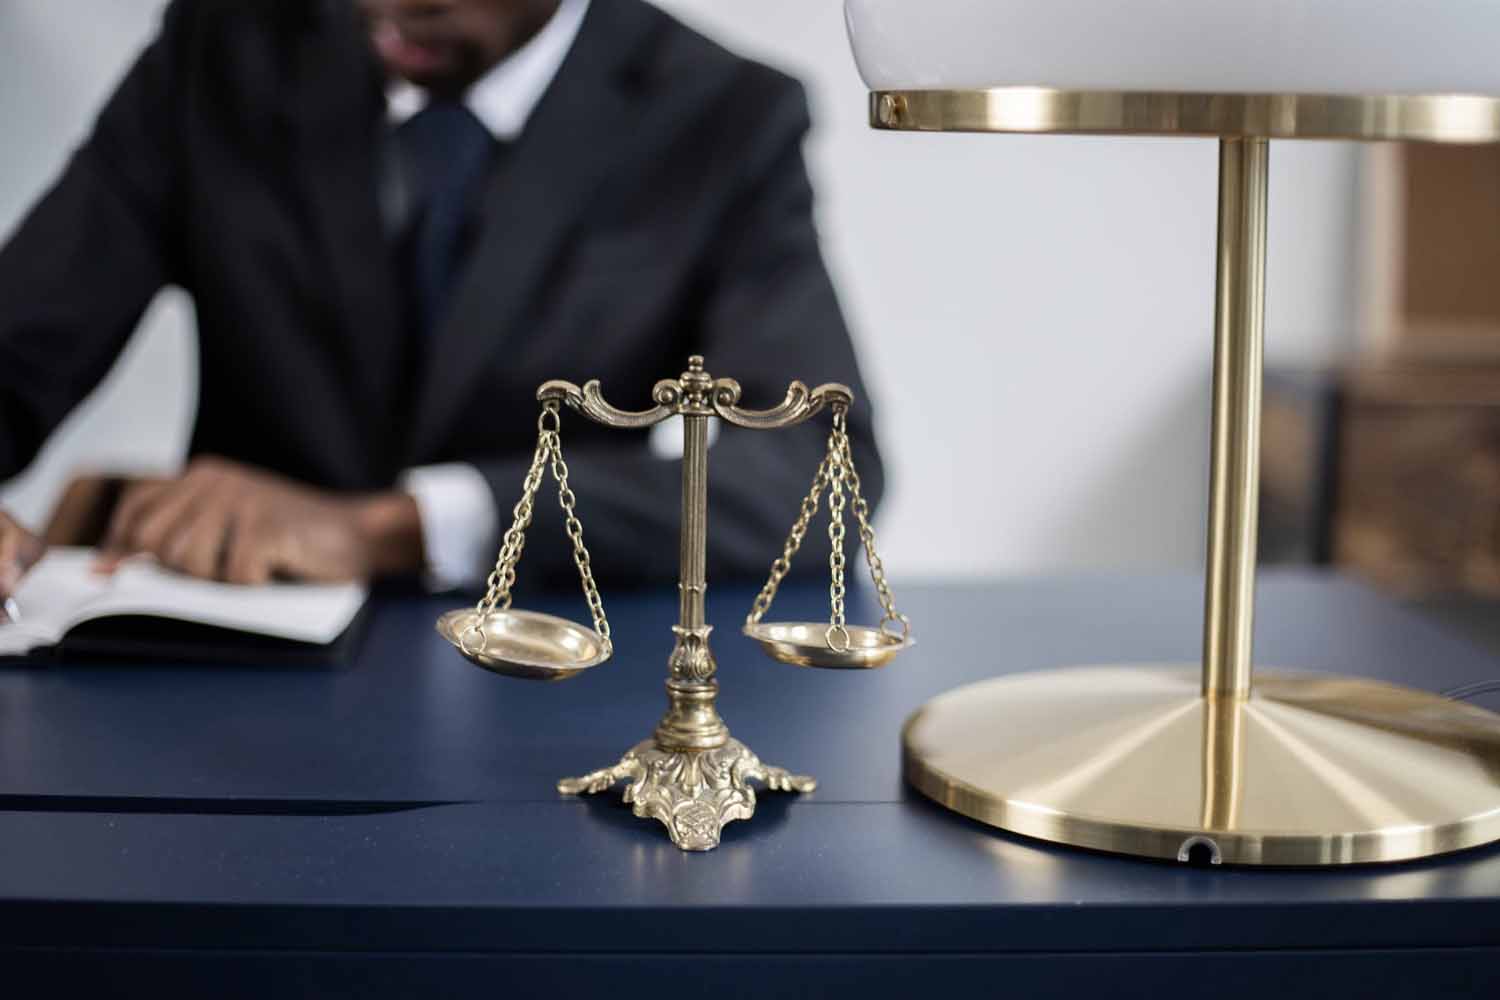 The scales of justice sitting on an attorney’s desk, next to a lamp